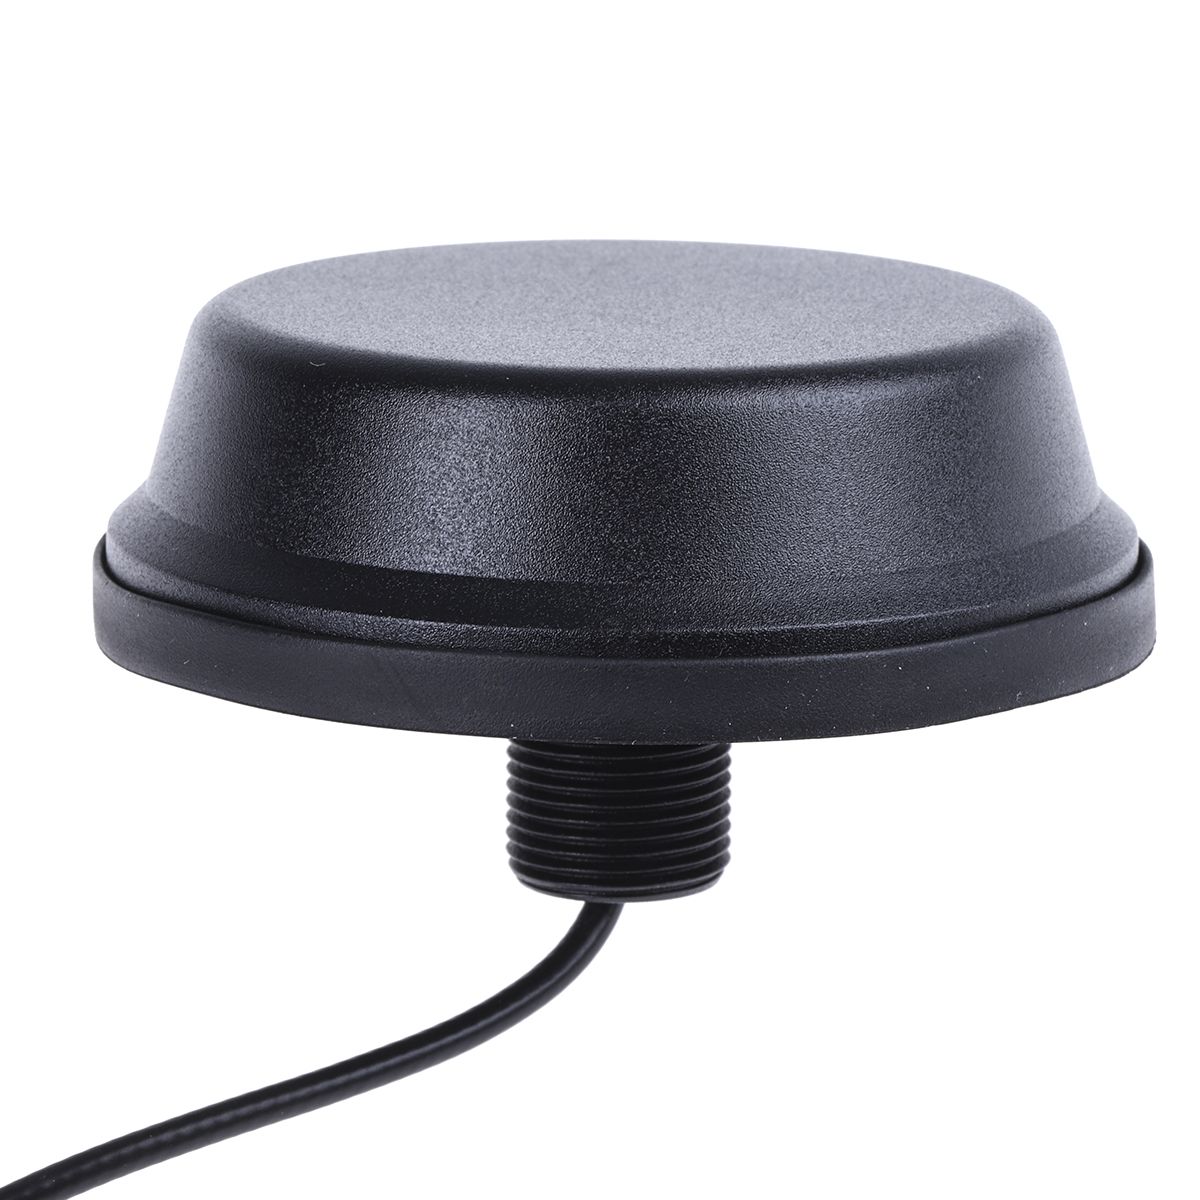 Siretta TANGO23/0.5M/SMAM/S/RP/19 Puck WiFi Antenna with SMA RP Connector, 4G, 4G (LTE), 5G (LTE), Bluetooth (BLE), ISM